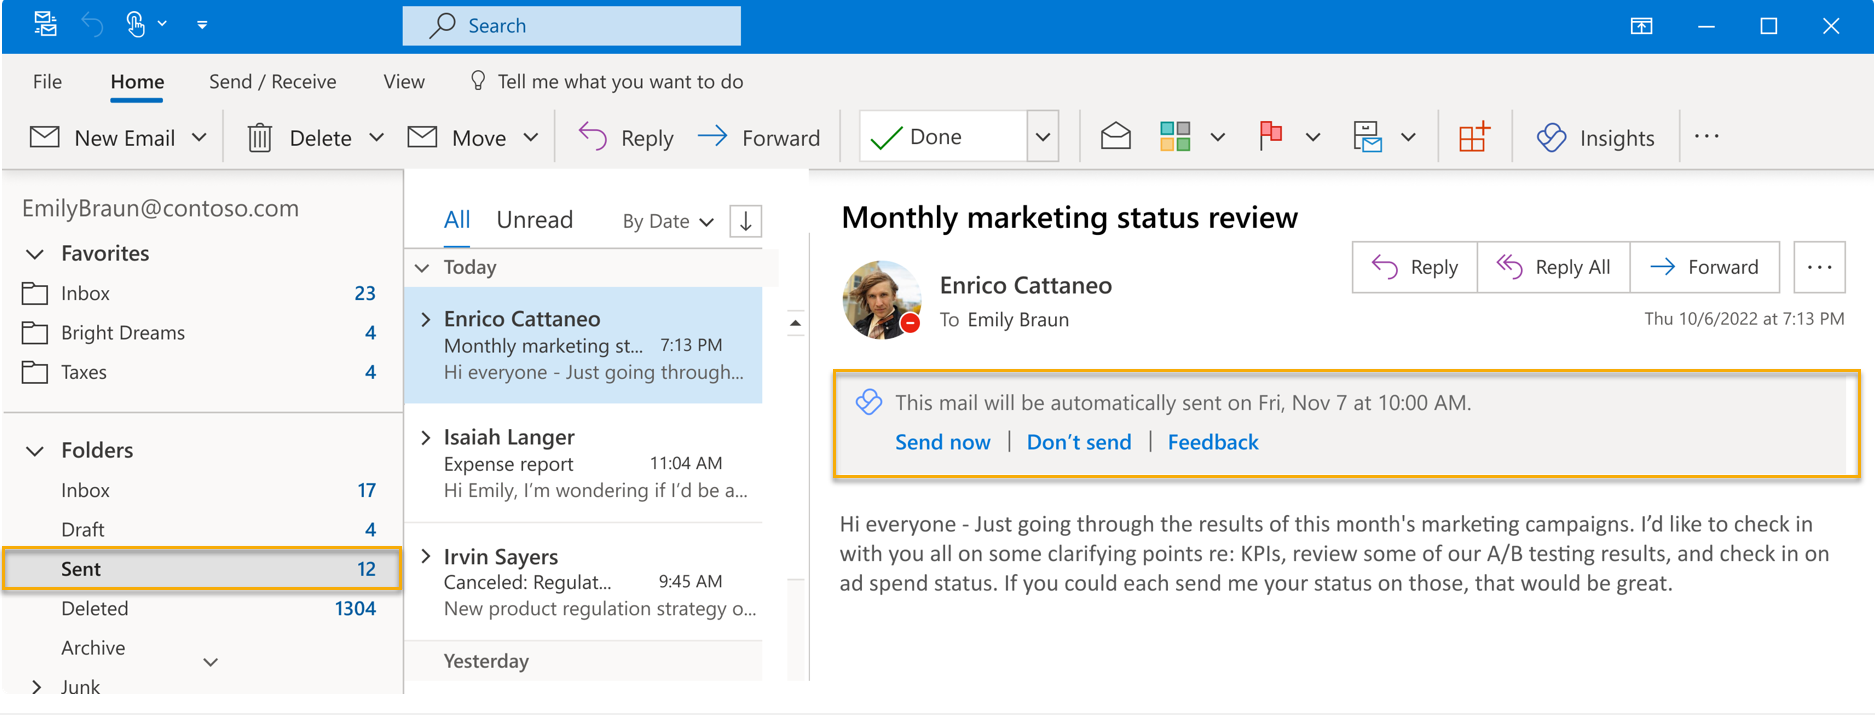 Screenshot that shows a scheduled message in the Outlook Sent folder with options Send now, Don't send, and Feedback.